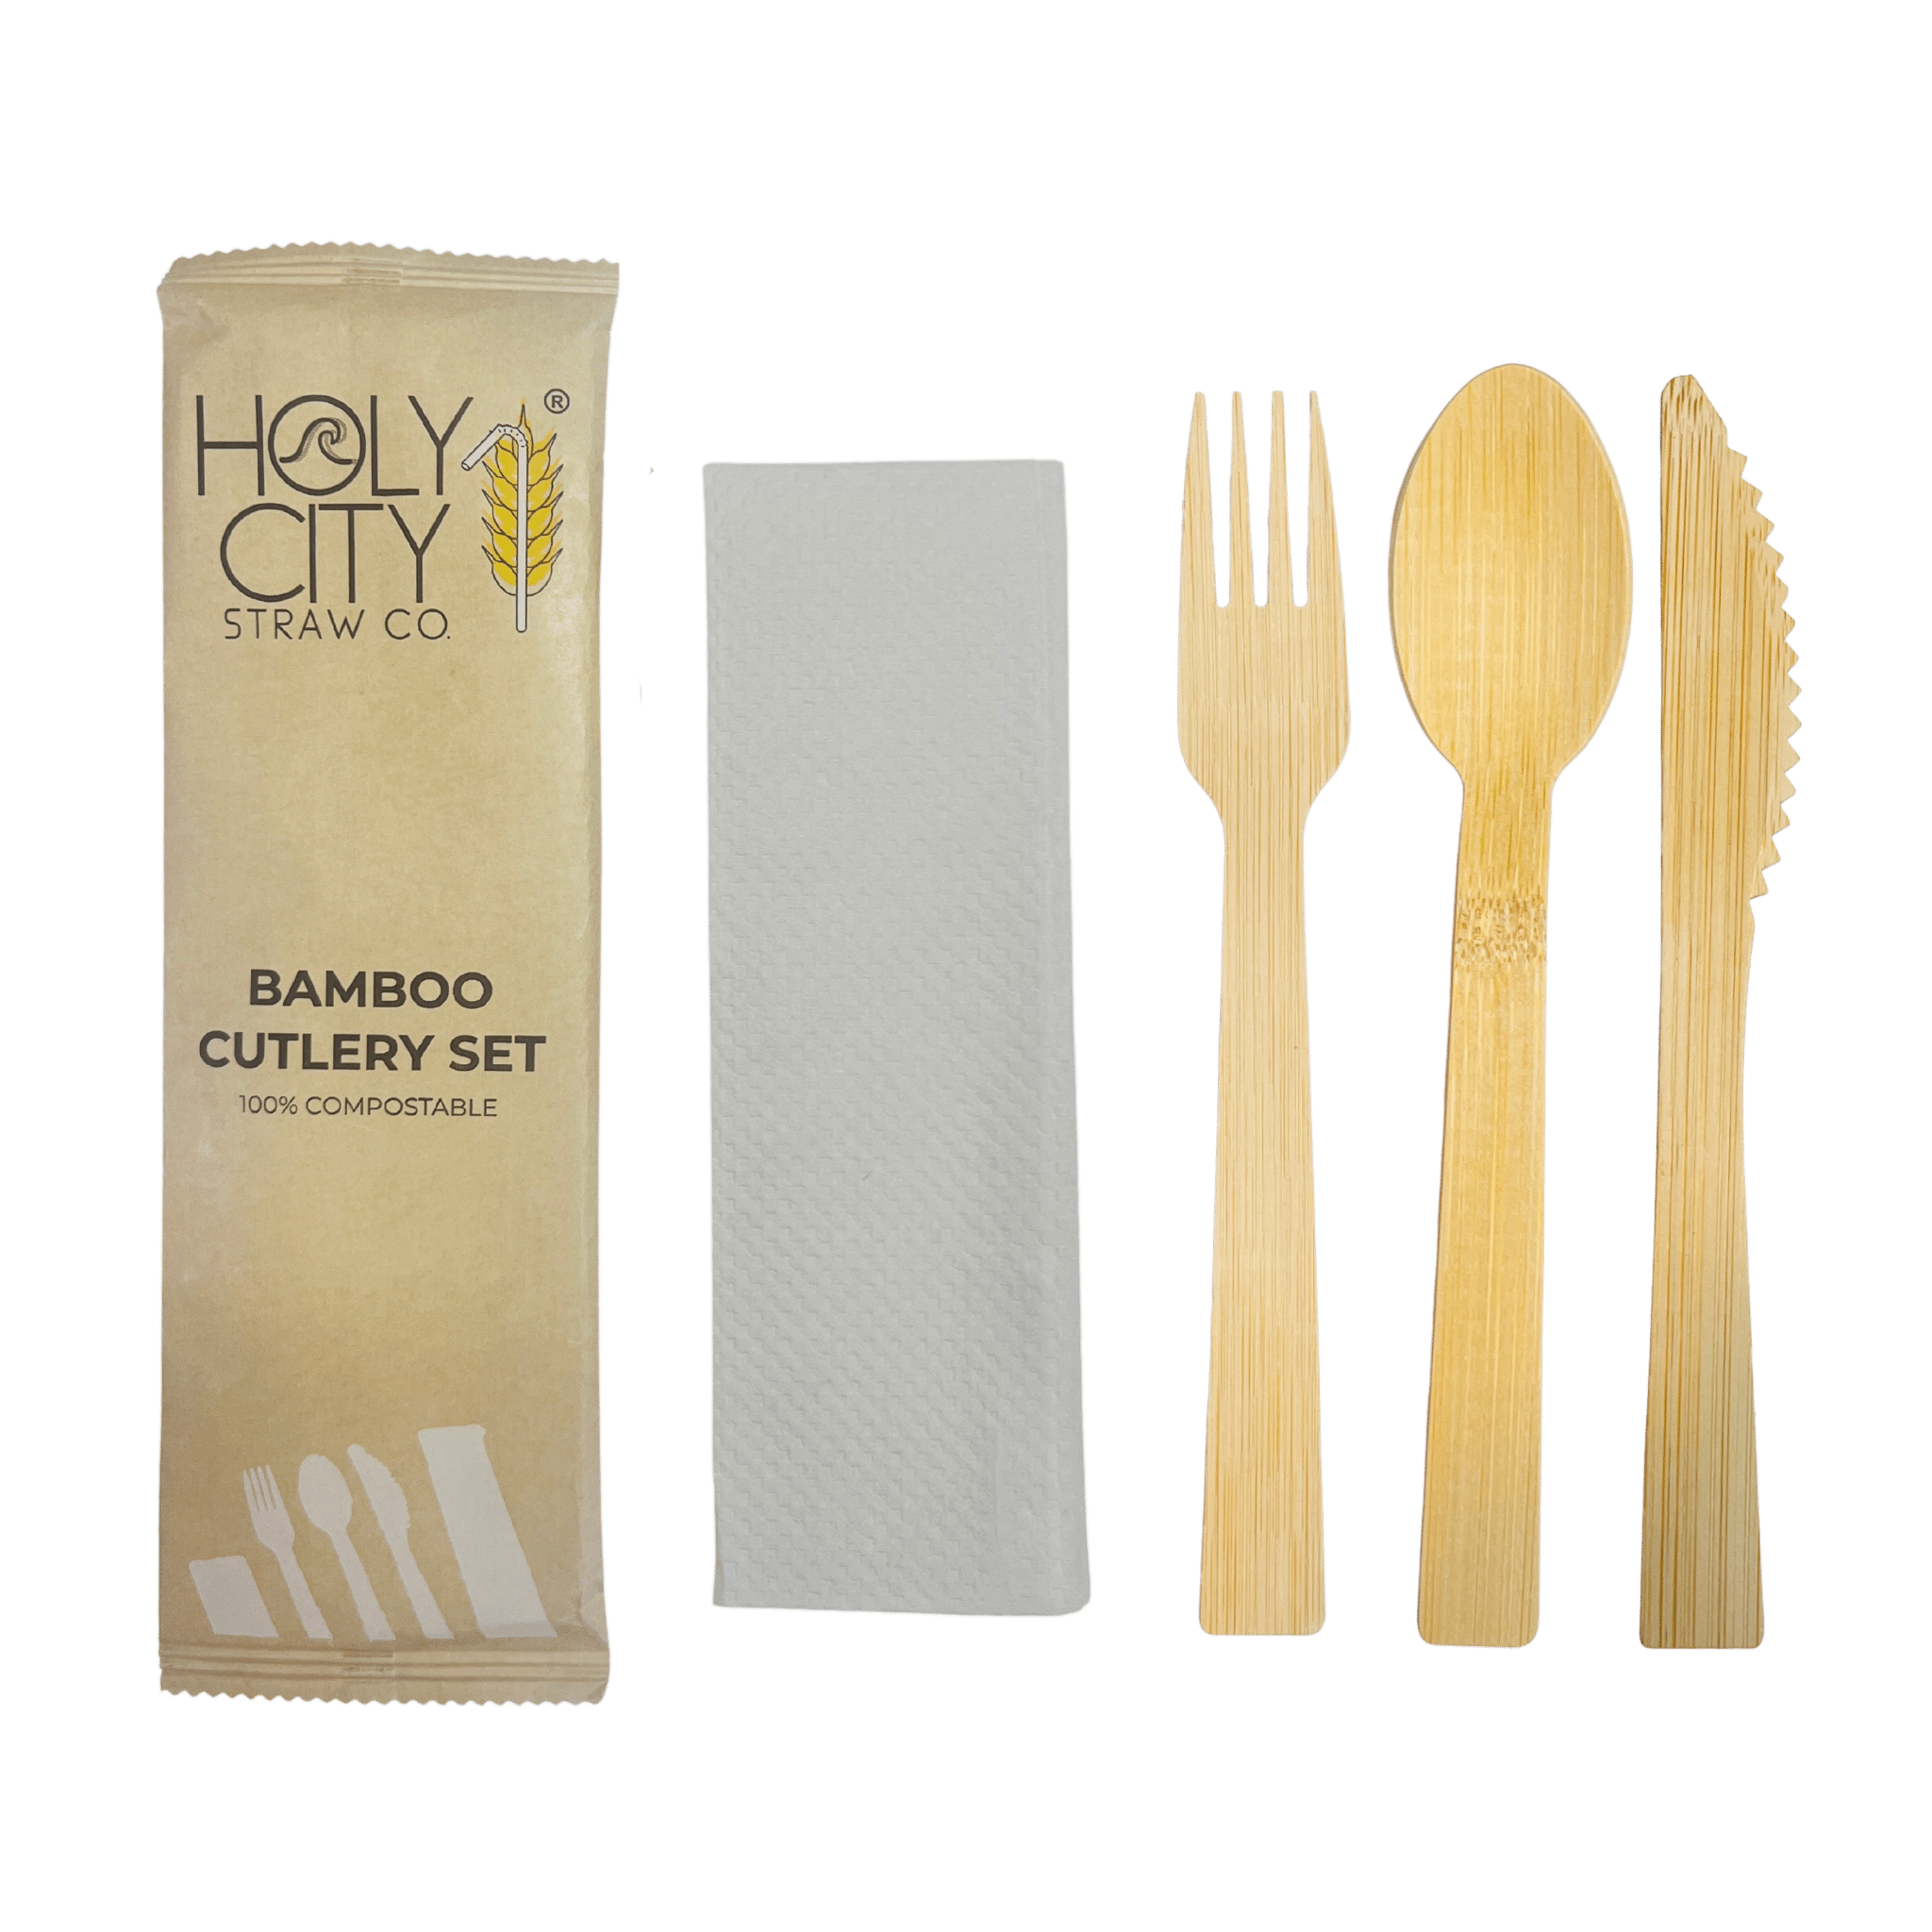 6.7" Wrapped Bamboo Cutlery Set by Holy City Straw Company